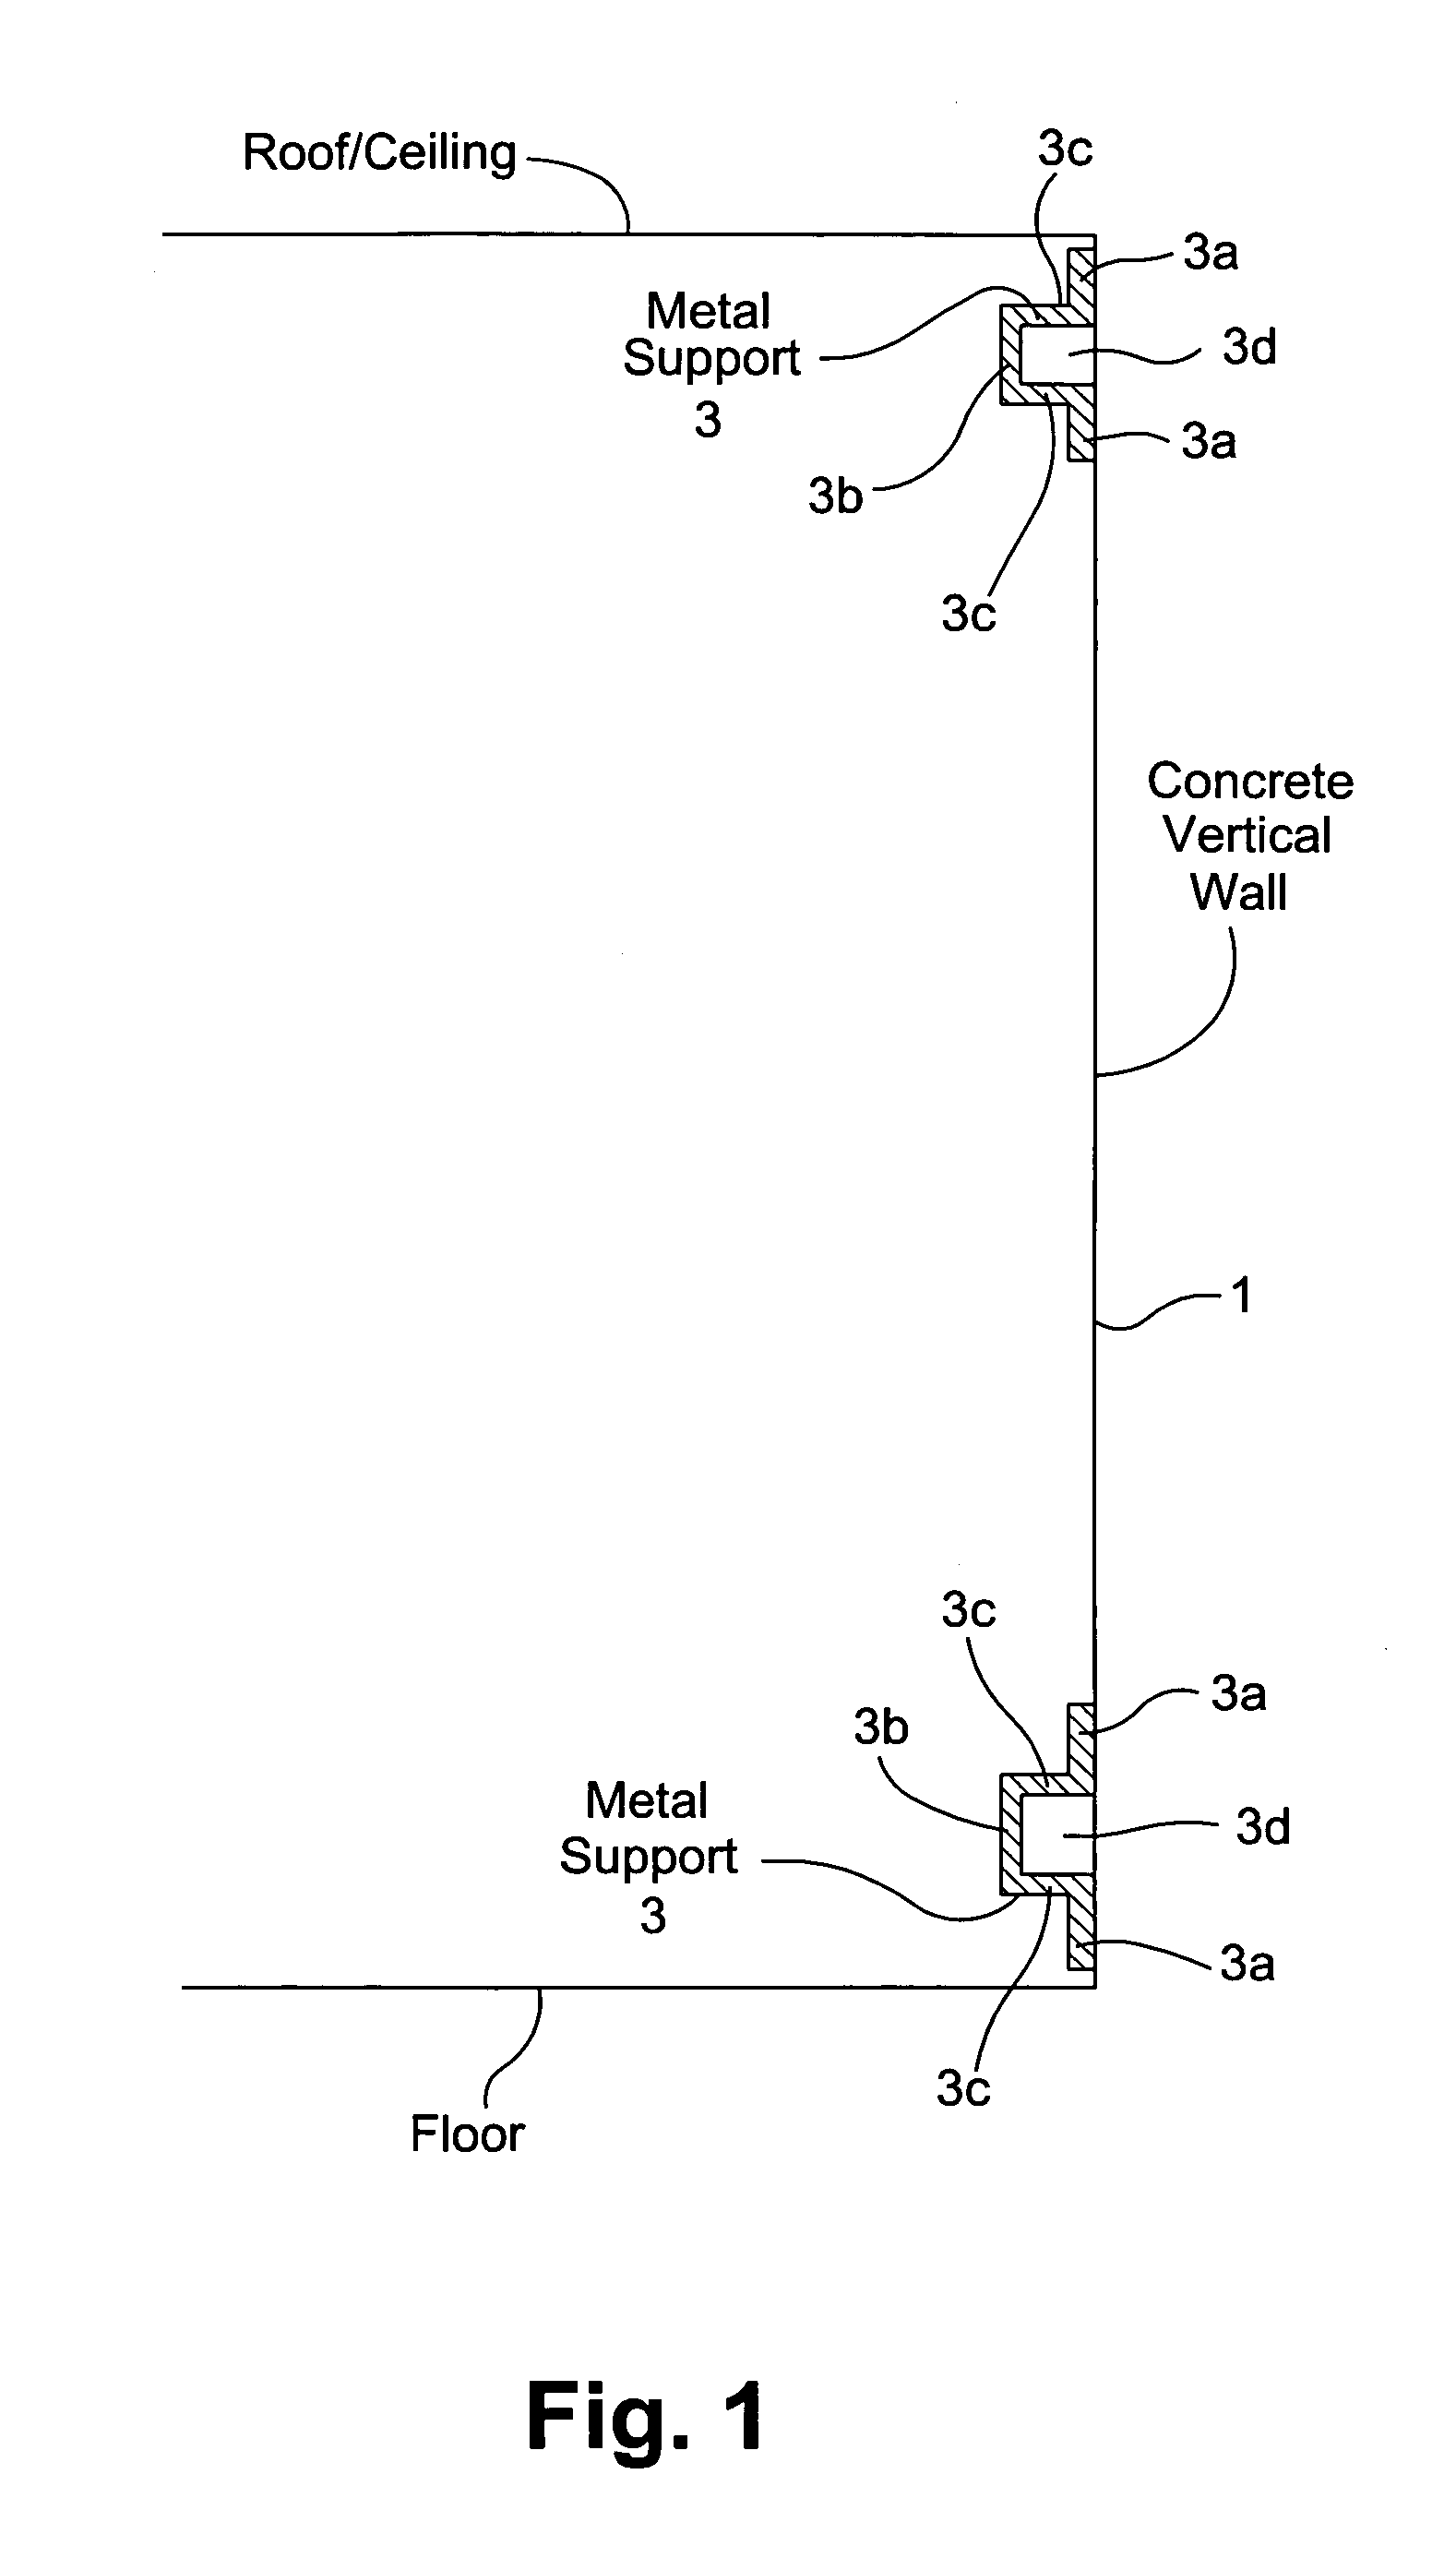 System for insulating vertical wall